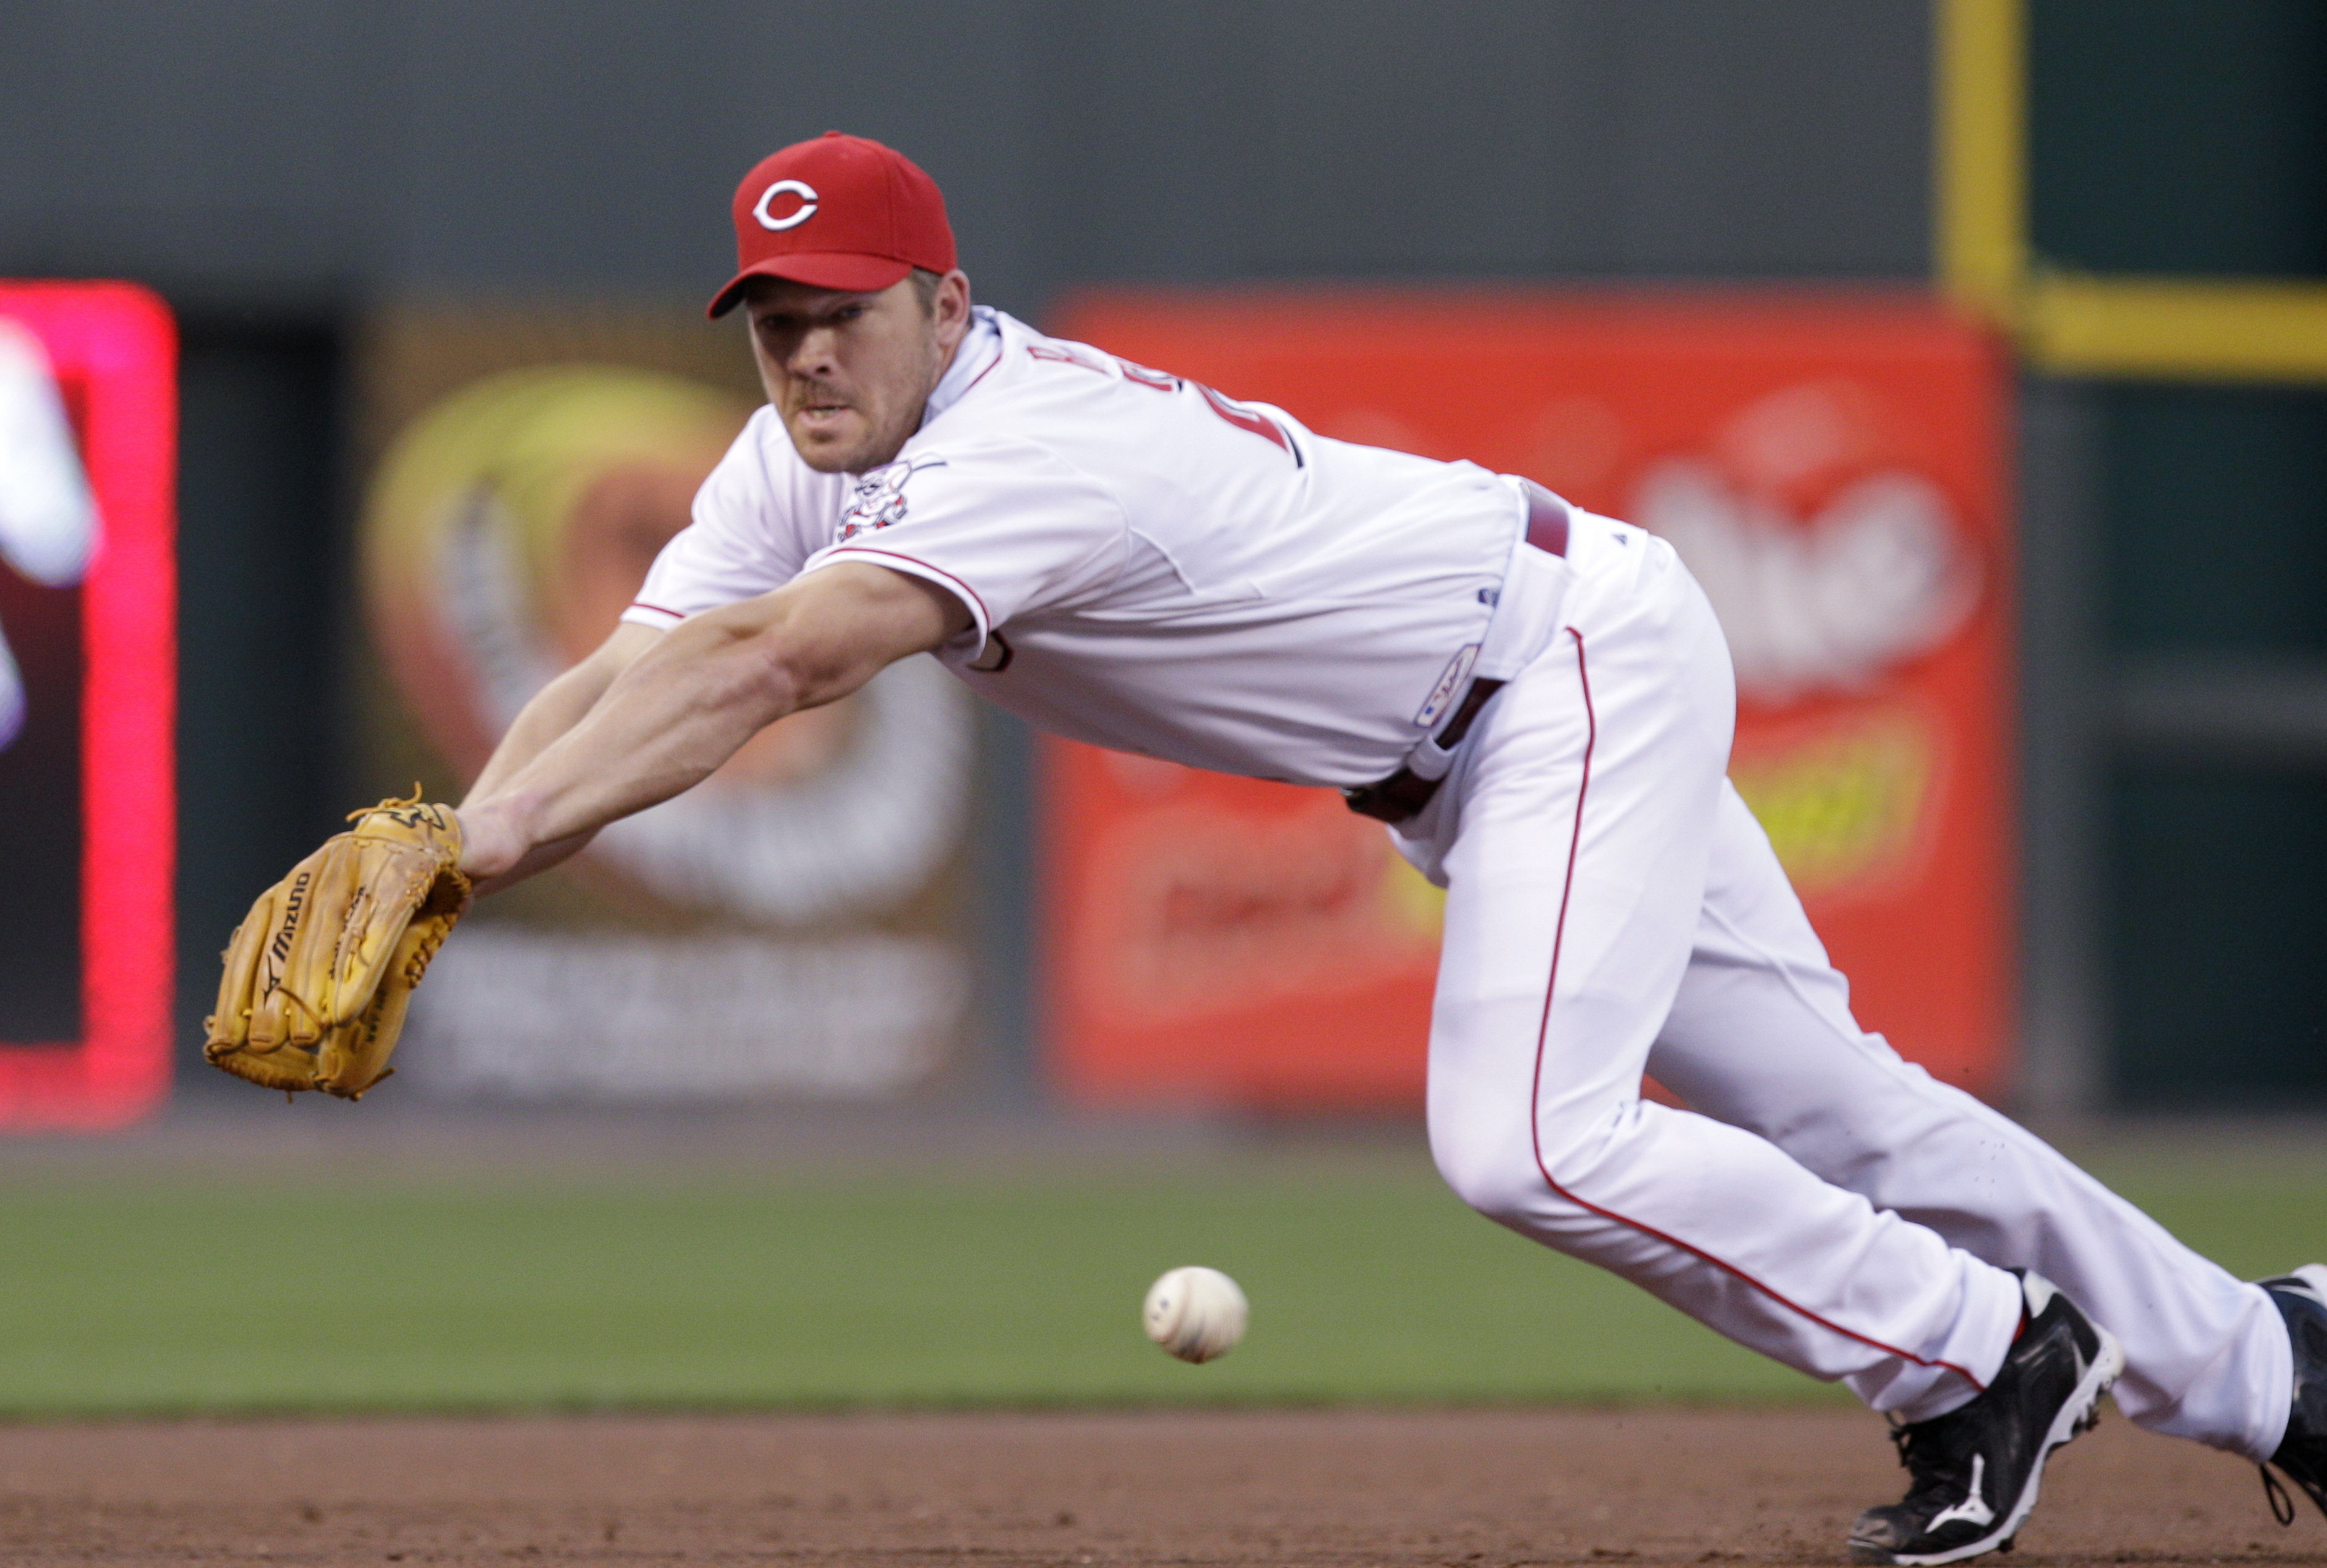 Scott Rolen has a real chance at getting into the Hall of Fame